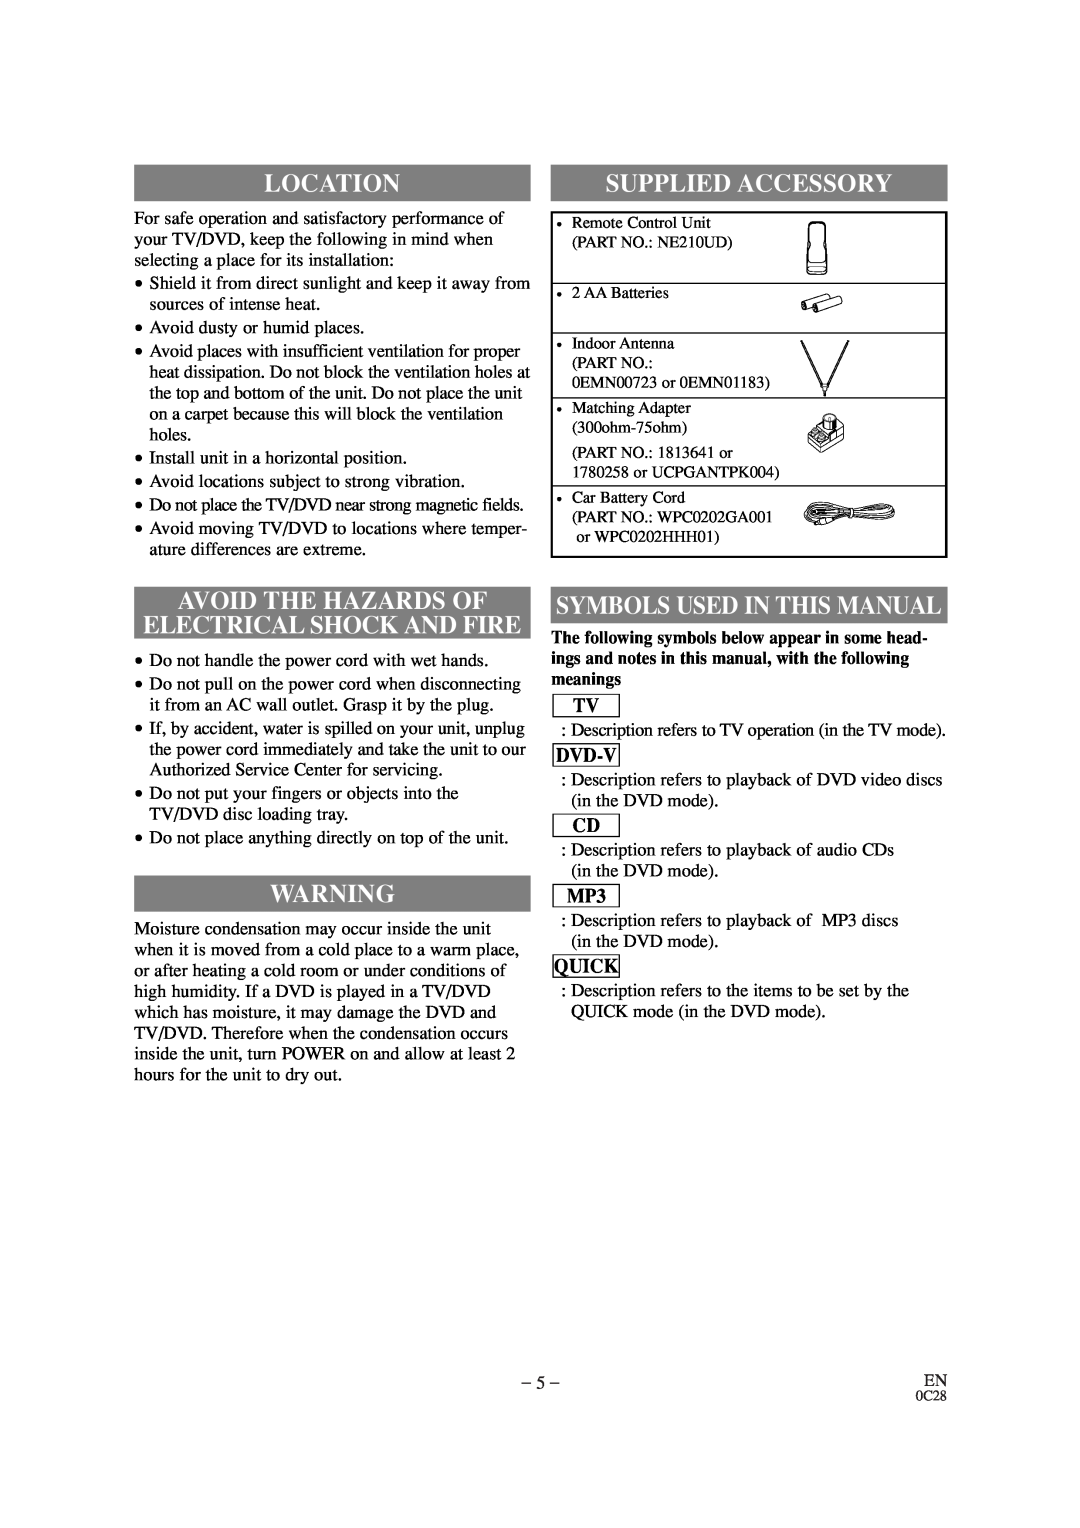 Sylvania SRTD309 Location, Supplied Accessory, Avoid The Hazards Of Electrical Shock And Fire, Symbols Used In This Manual 